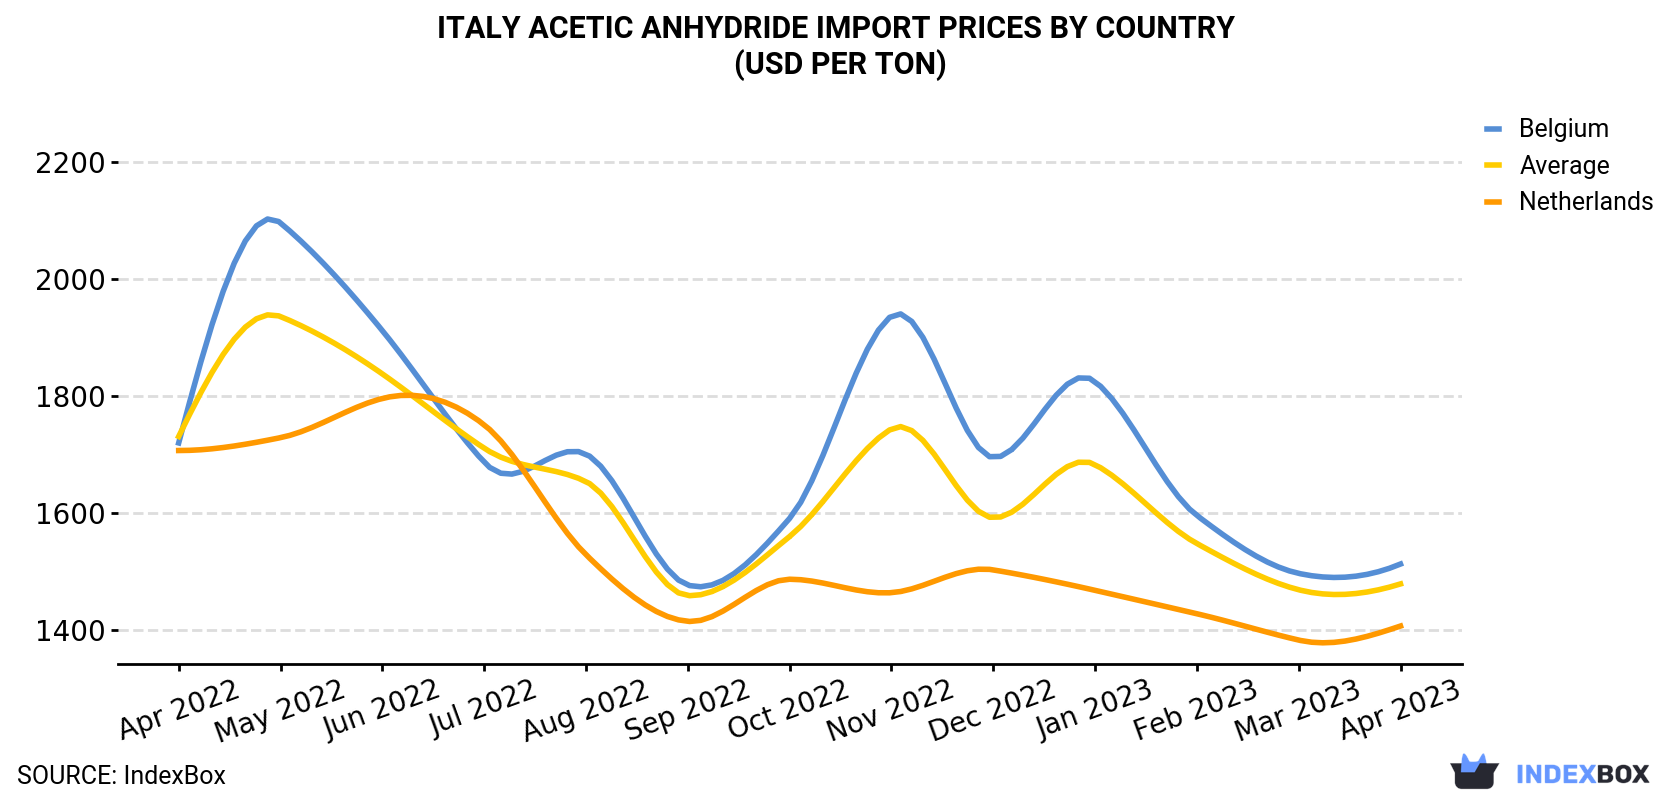 Italy Acetic Anhydride Import Prices By Country (USD Per Ton)